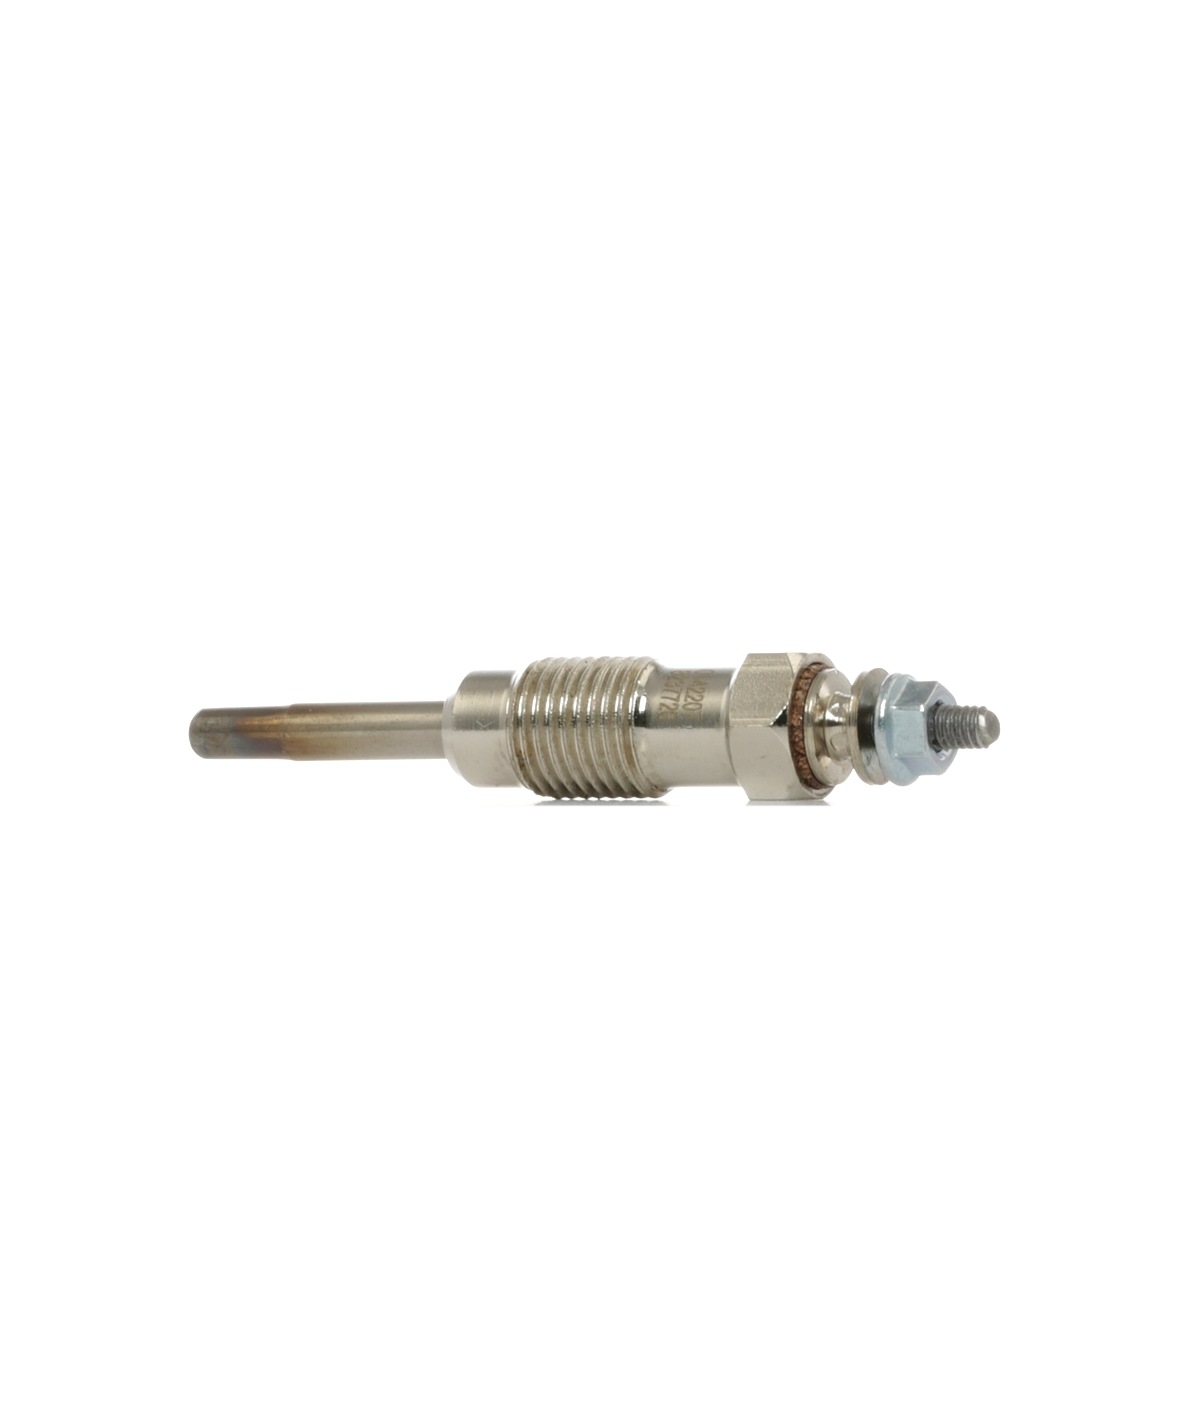 STARK 11V M 12x1,25, after-glow capable, Pencil-type Glow Plug, 72 mm, 22 Nm, 45 Nm, 63 Total Length: 72mm, Thread Size: M 12x1,25 Glow plugs SKGP-1890083 buy